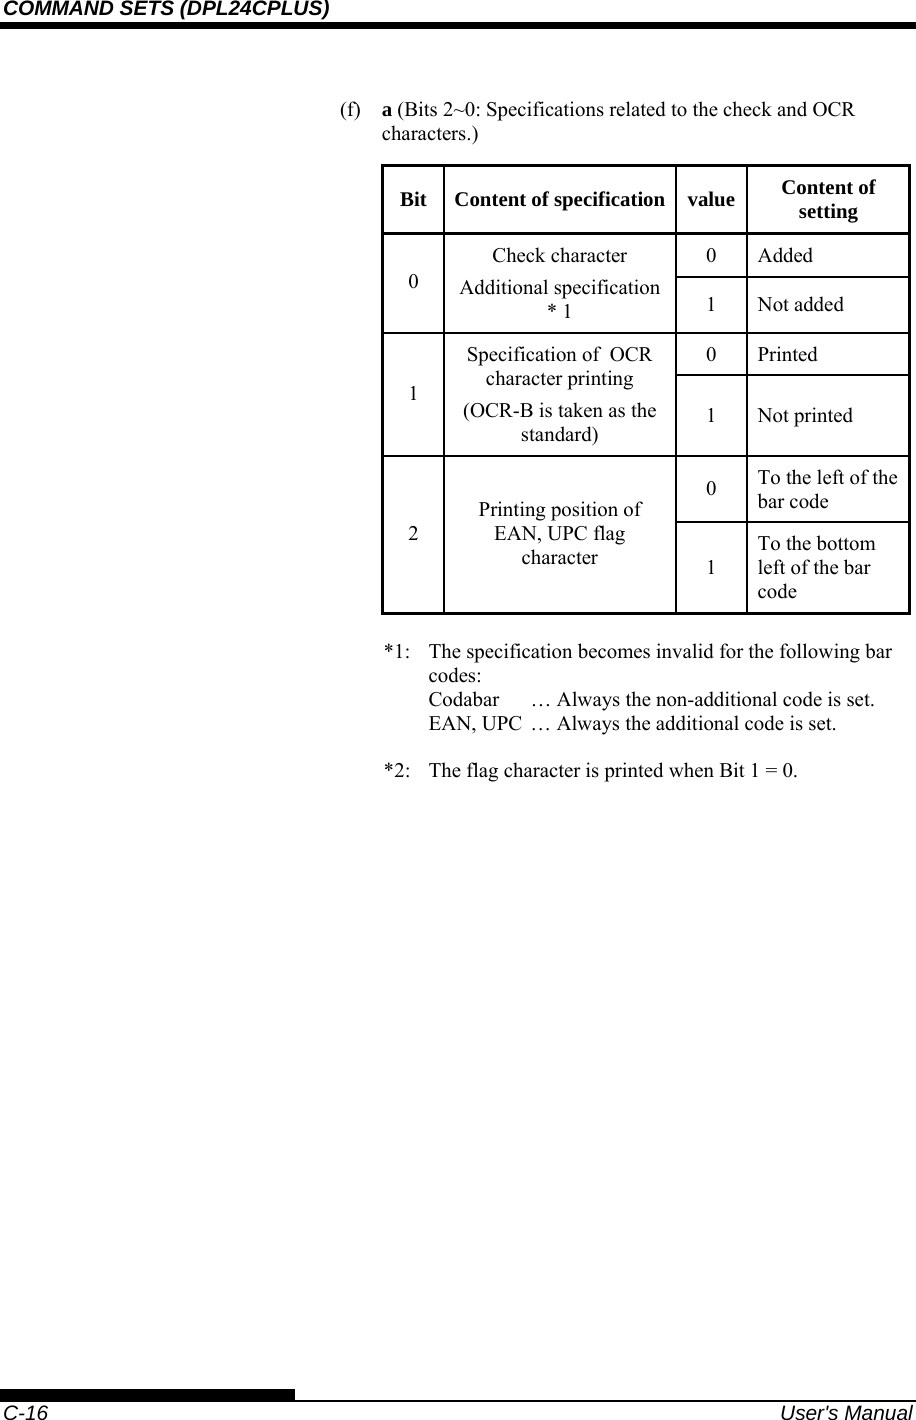 COMMAND SETS (DPL24CPLUS)    C-16  User&apos;s Manual (f)  a (Bits 2~0: Specifications related to the check and OCR characters.) Bit Content of specification value Content of setting 0 Added 0 Check character Additional specification * 1  1 Not added 0 Printed 1 Specification of  OCR character printing (OCR-B is taken as the standard)  1 Not printed 0  To the left of the bar code 2 Printing position of EAN, UPC flag character  1 To the bottom left of the bar code  *1:  The specification becomes invalid for the following bar codes:   Codabar   … Always the non-additional code is set.   EAN, UPC  … Always the additional code is set.  *2:   The flag character is printed when Bit 1 = 0.  